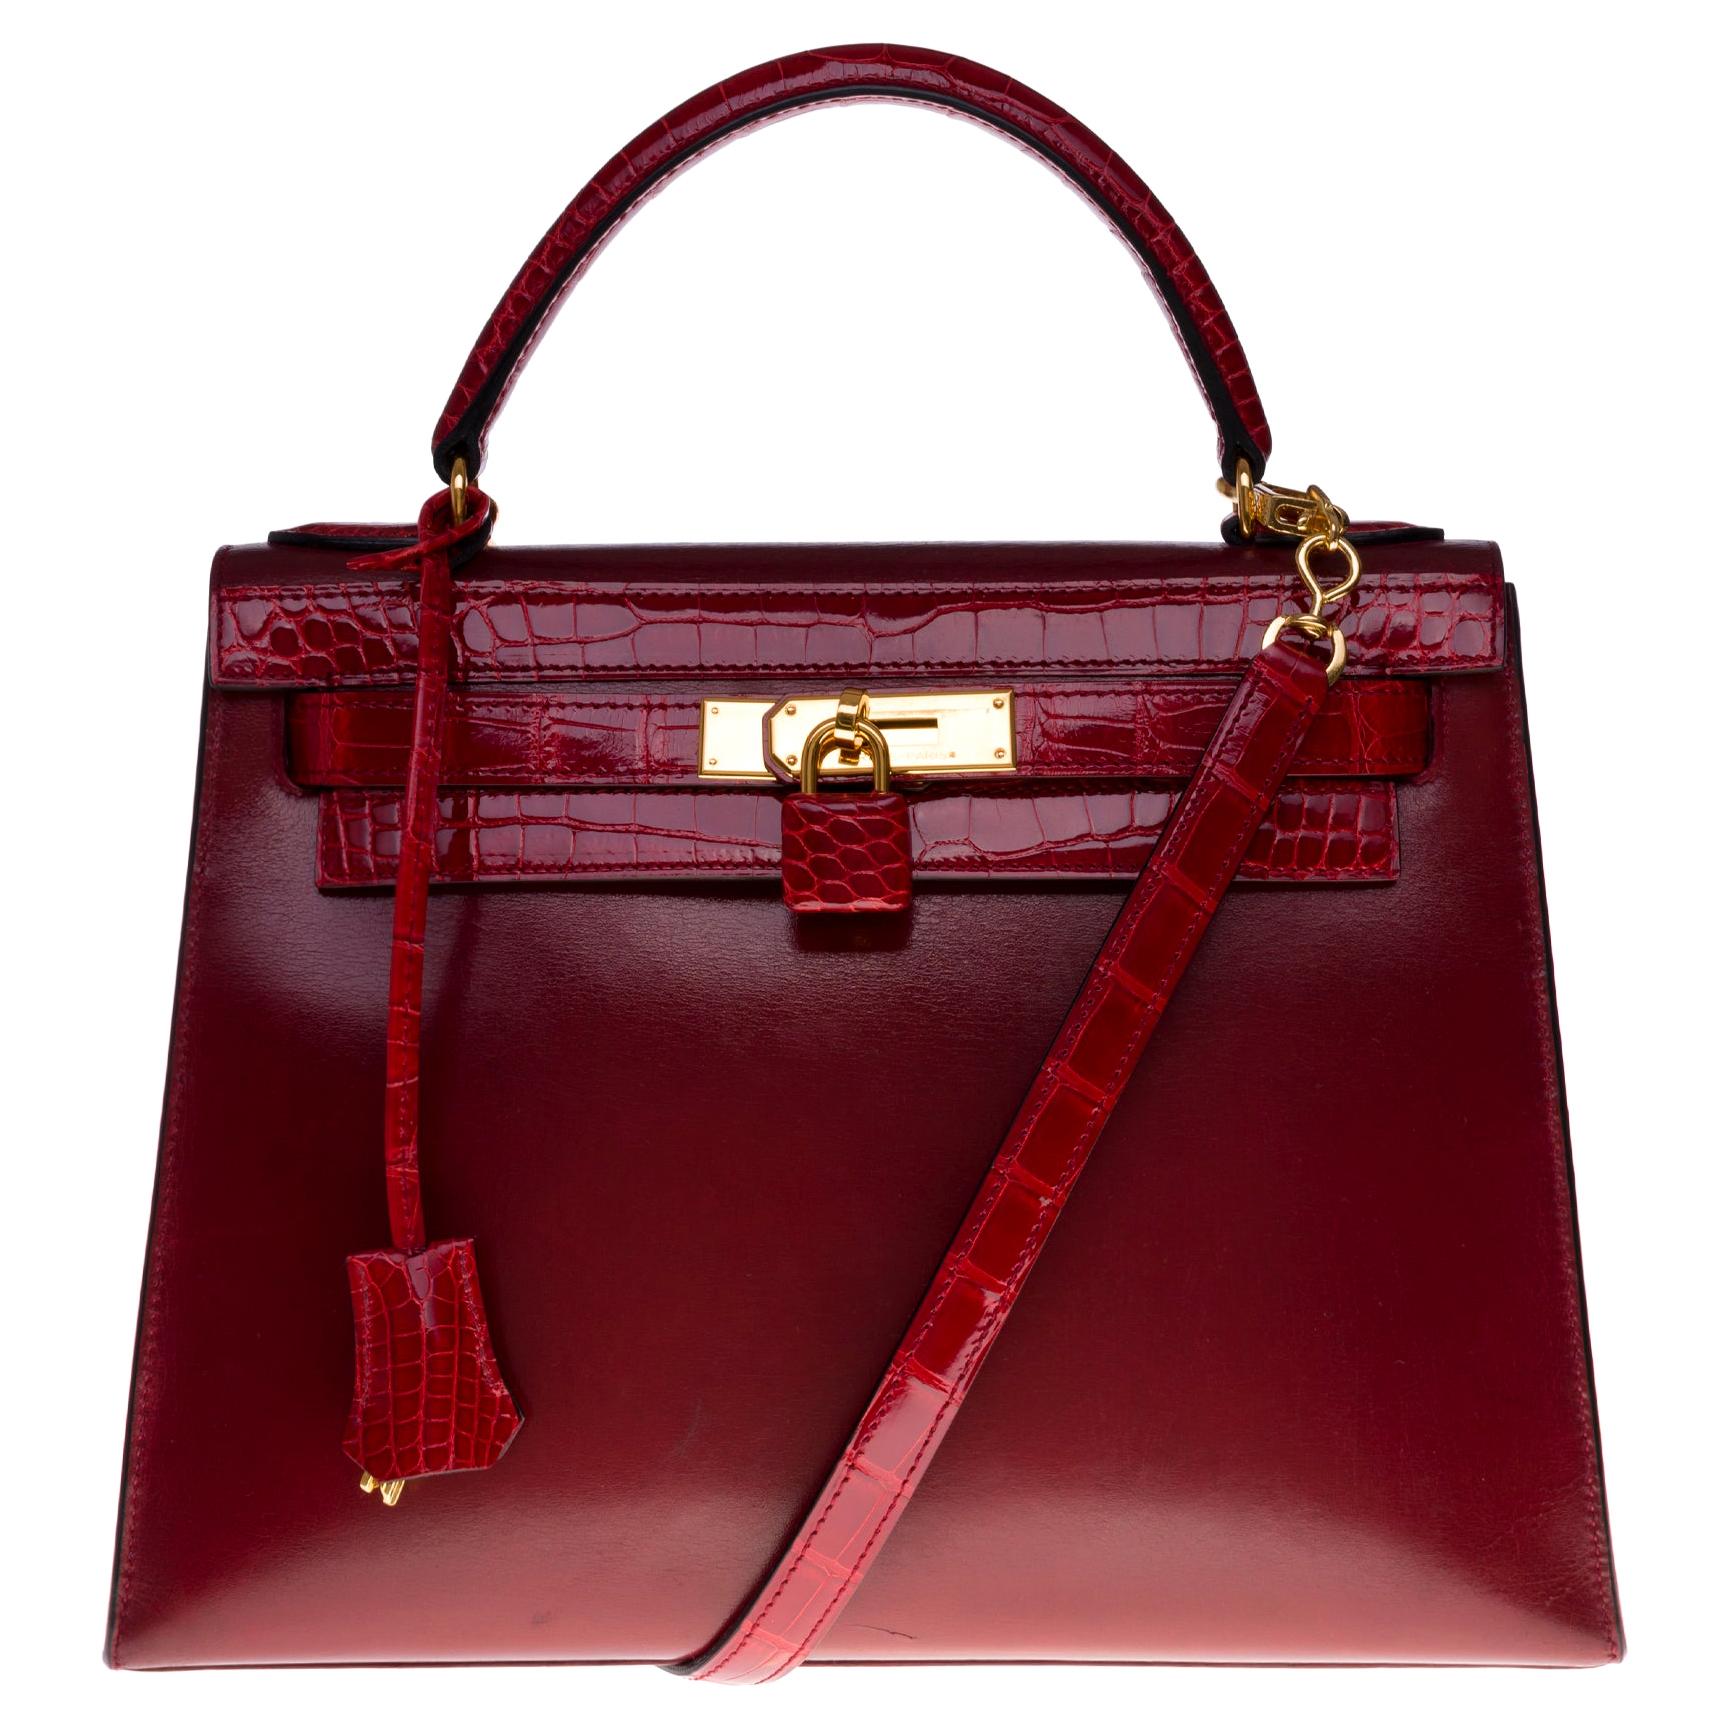 Customized Hermès Kelly 32 in Rouge H calfskin strap with Red Crocodile, GHW 